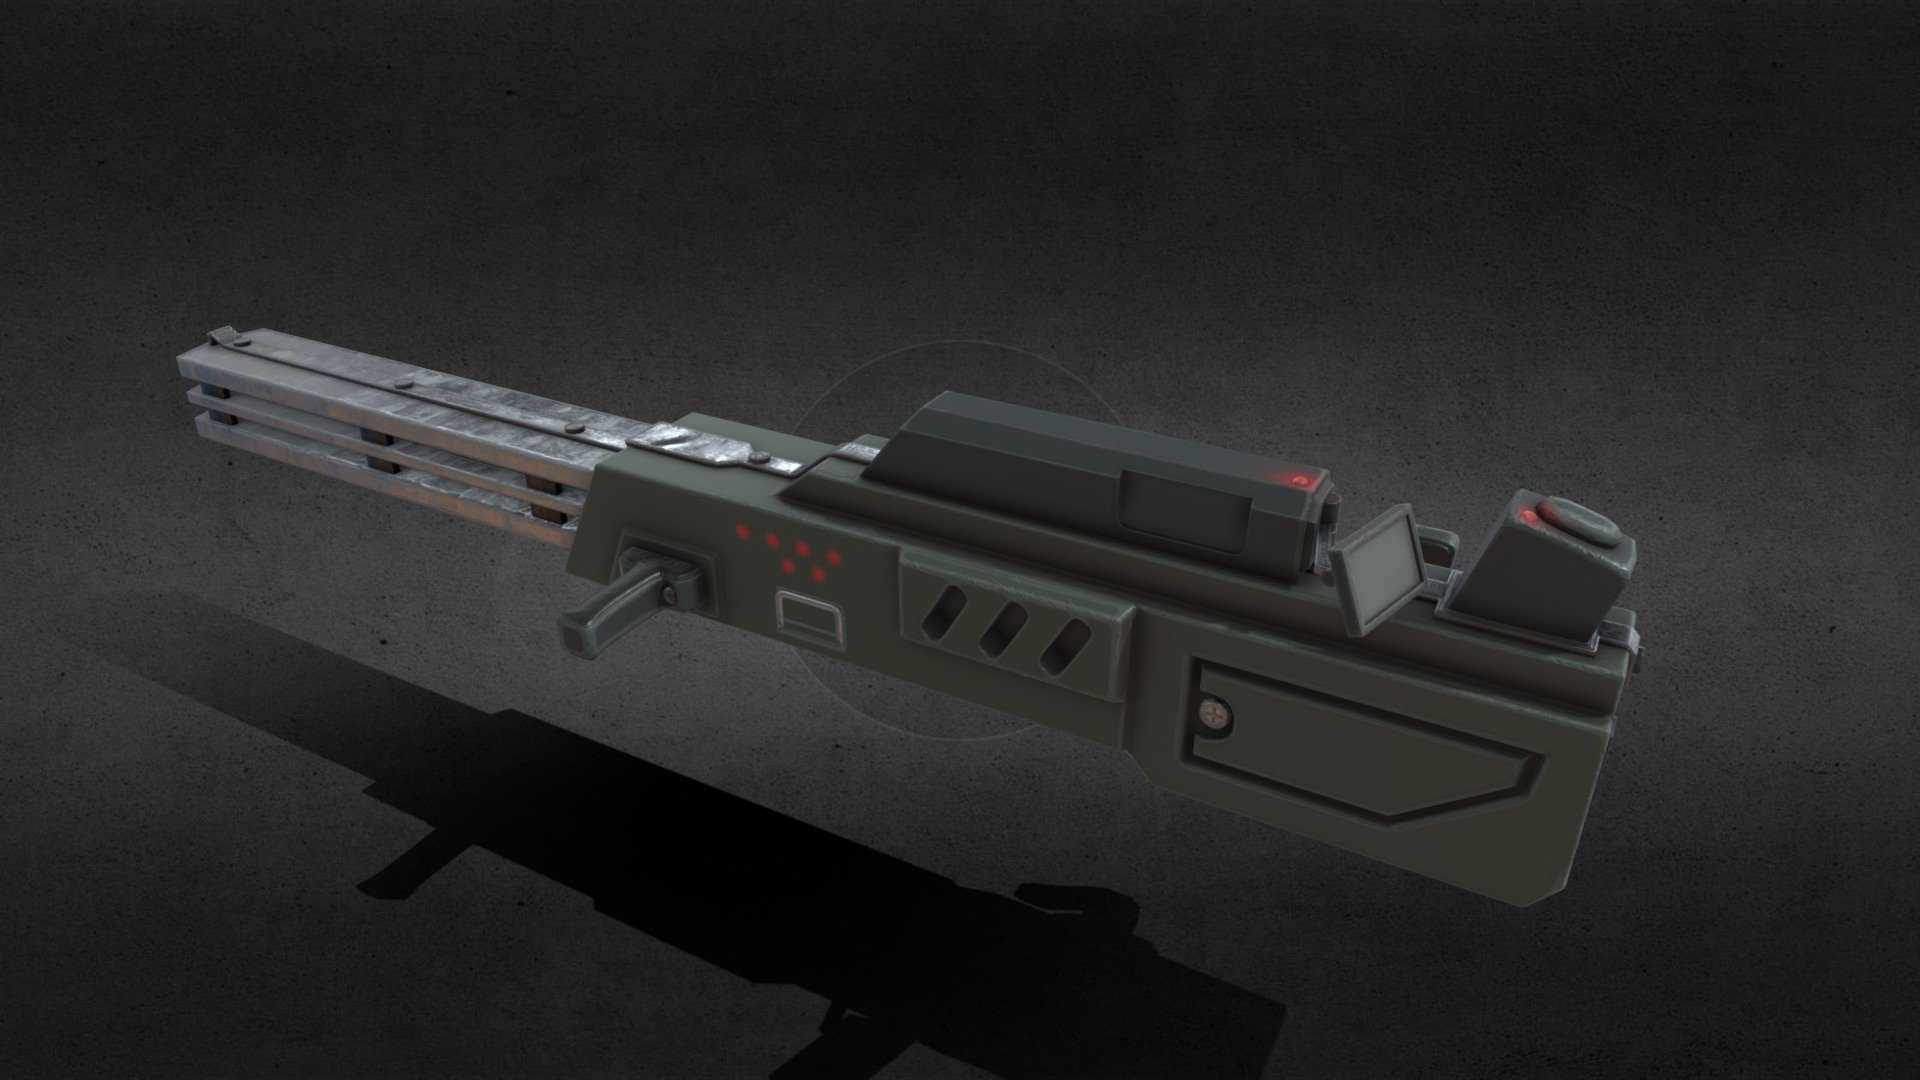 E-Pulse 88 Rifle from Starship Troopers